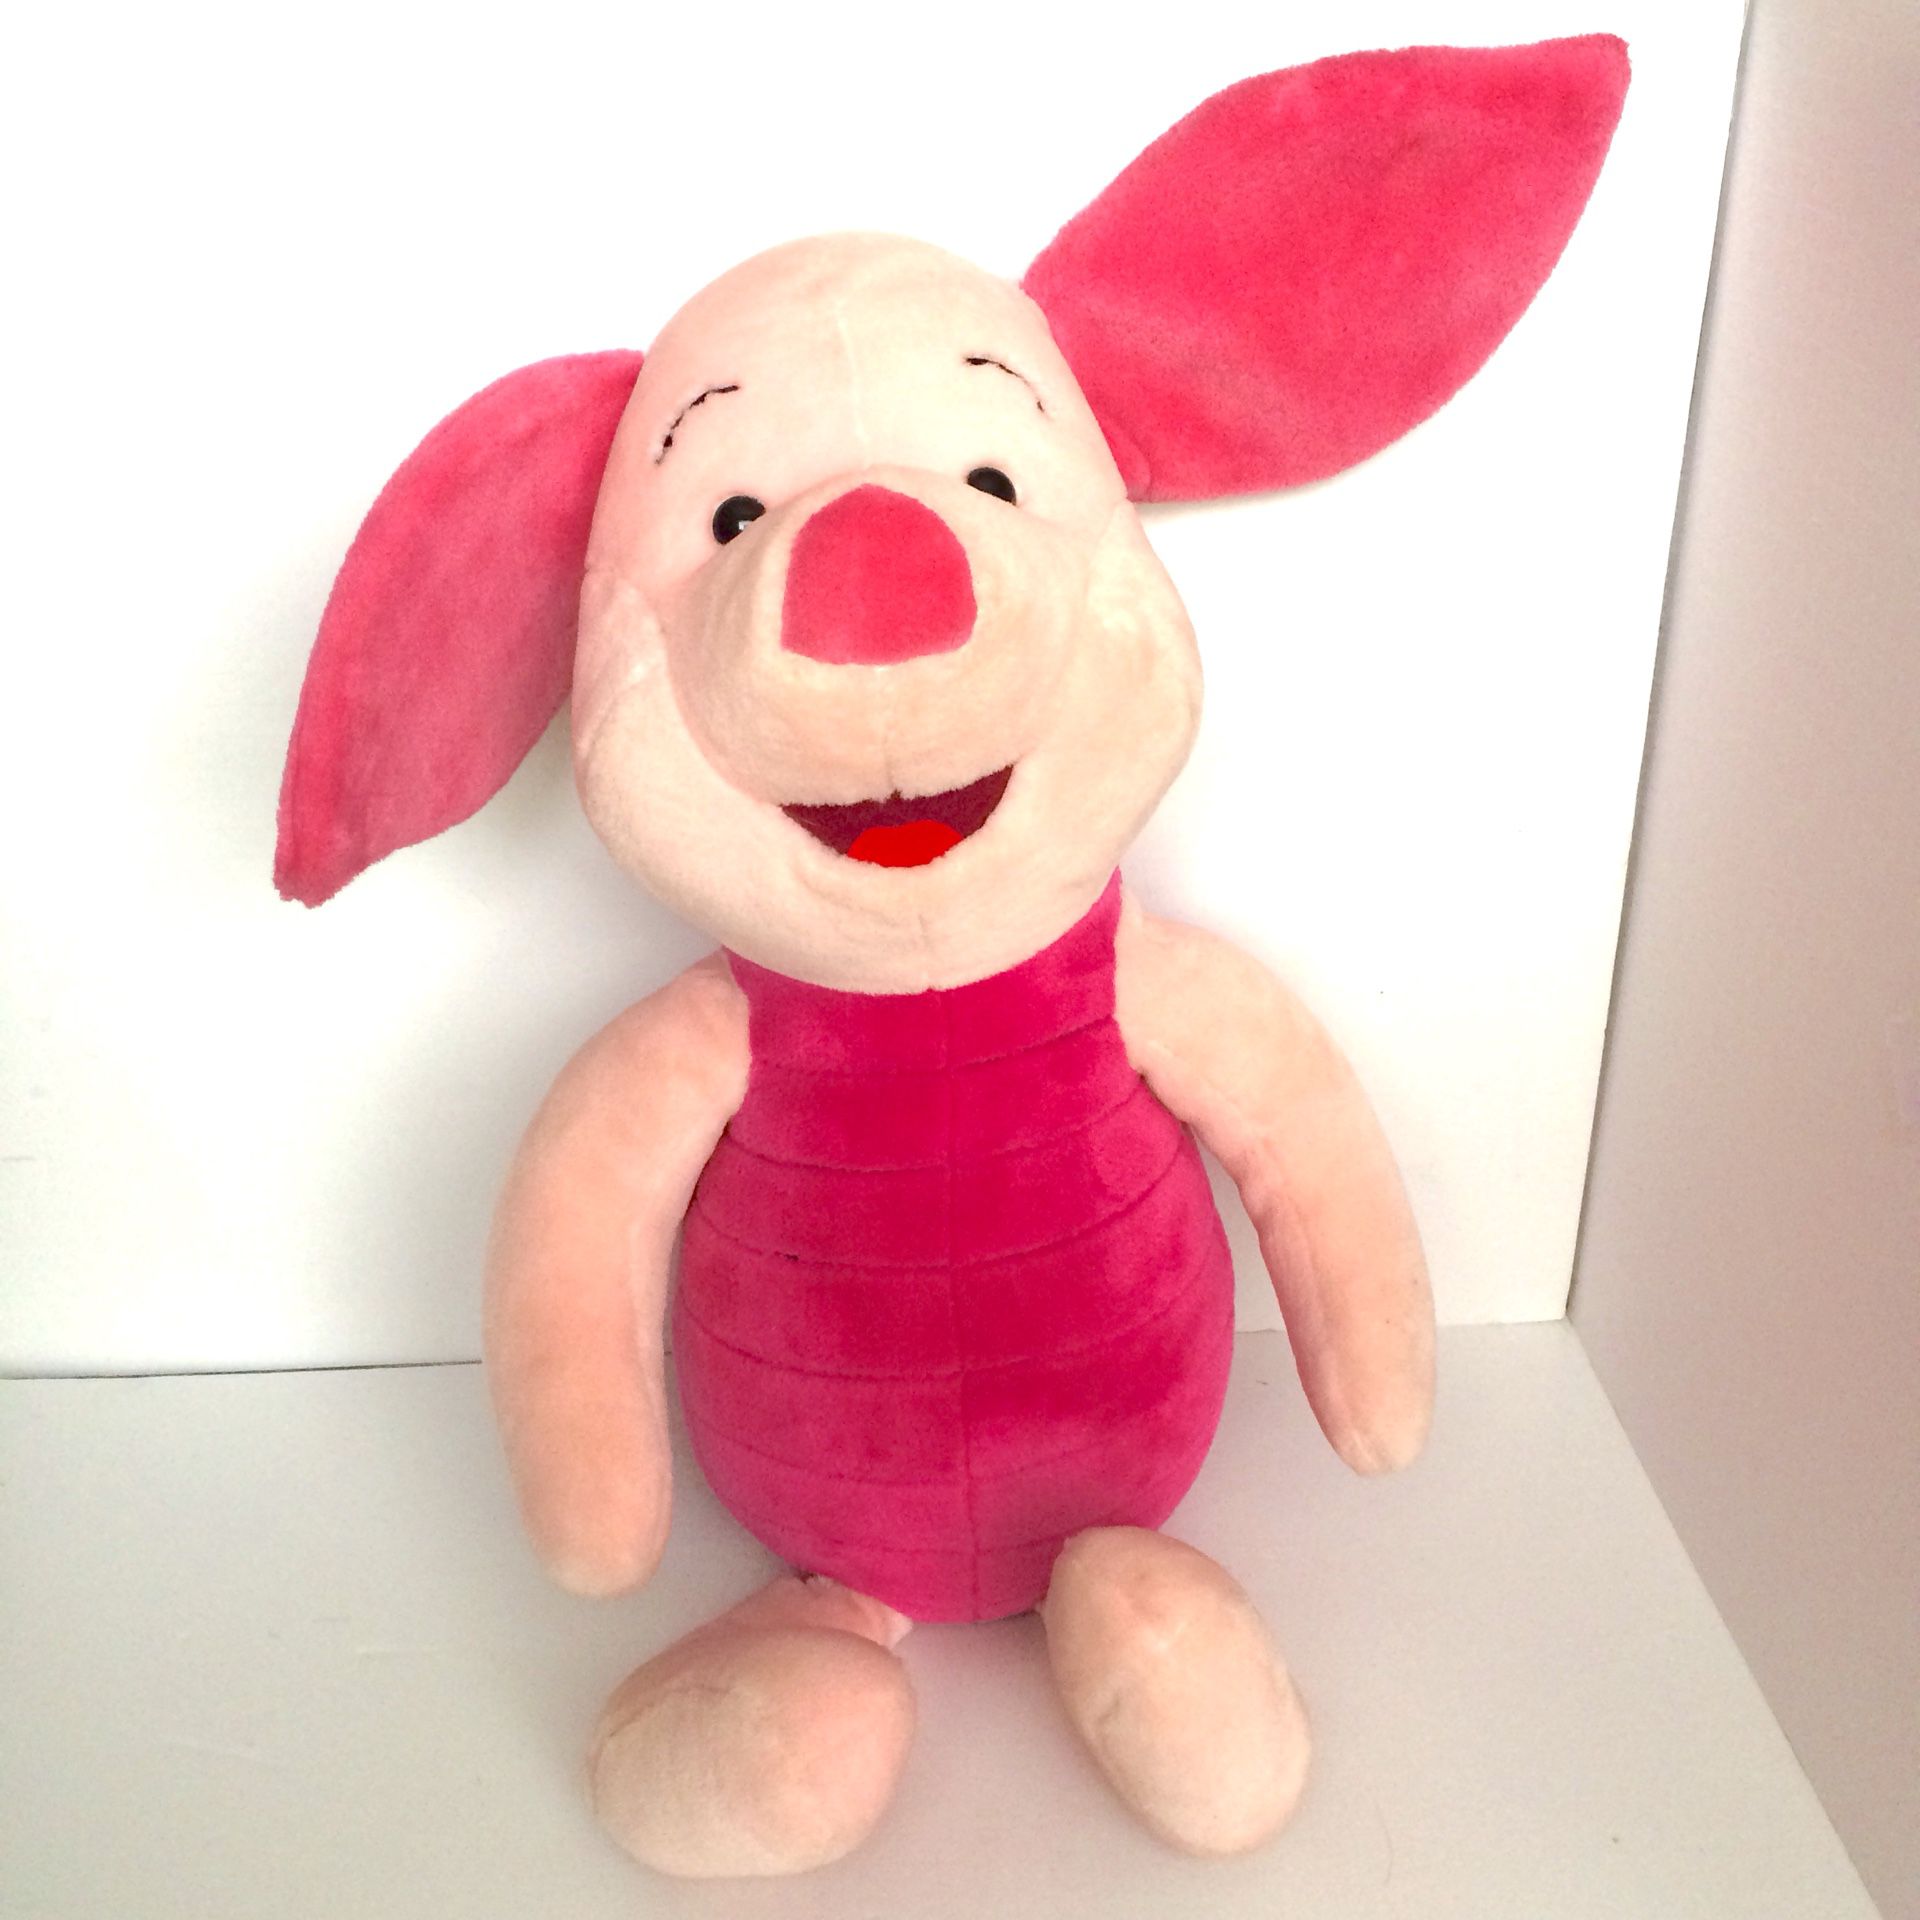 Preowned Jumbo 24” Squeeze-able Piglet Winnie the Pooh